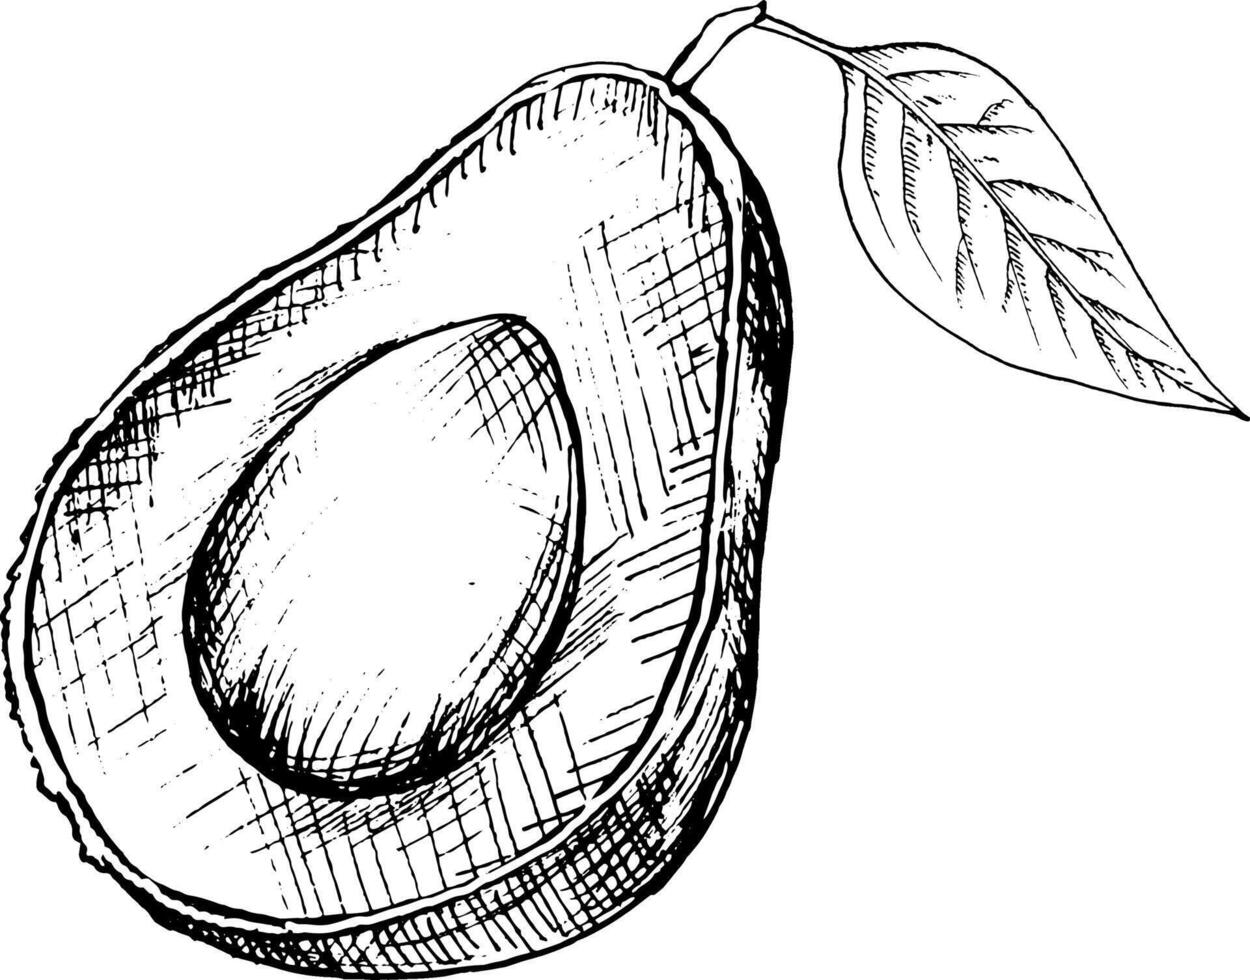 graphic image of whole avocado fruit, avocado halves, pieces, leaves, hand drawing. vector